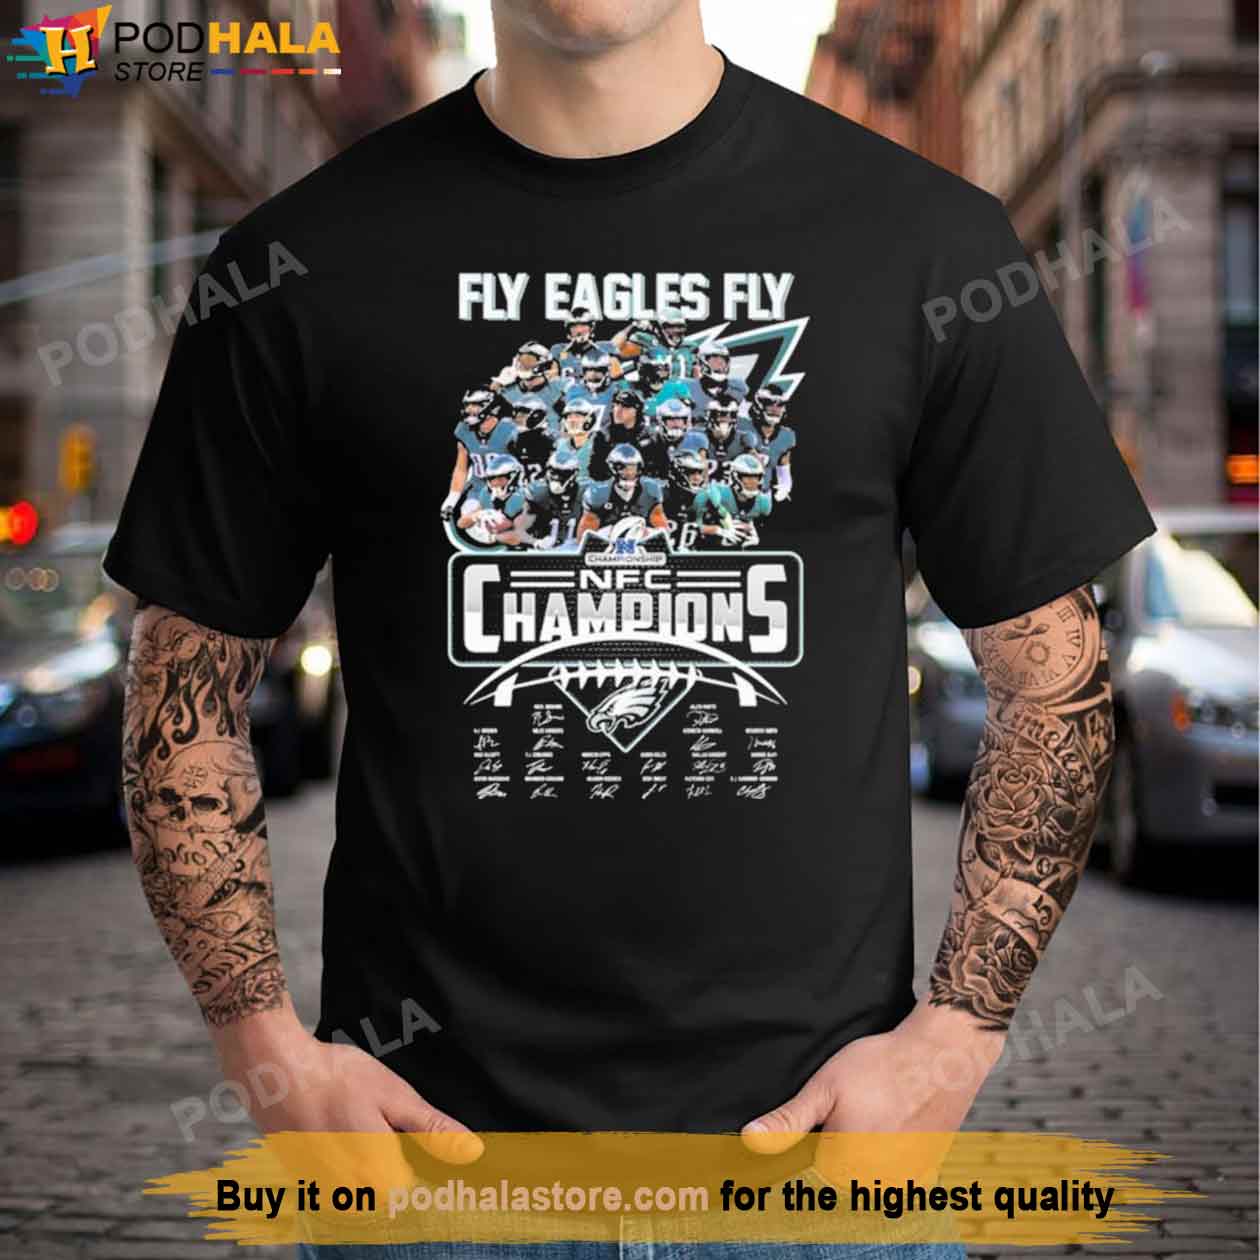 fly eagles fly shirt